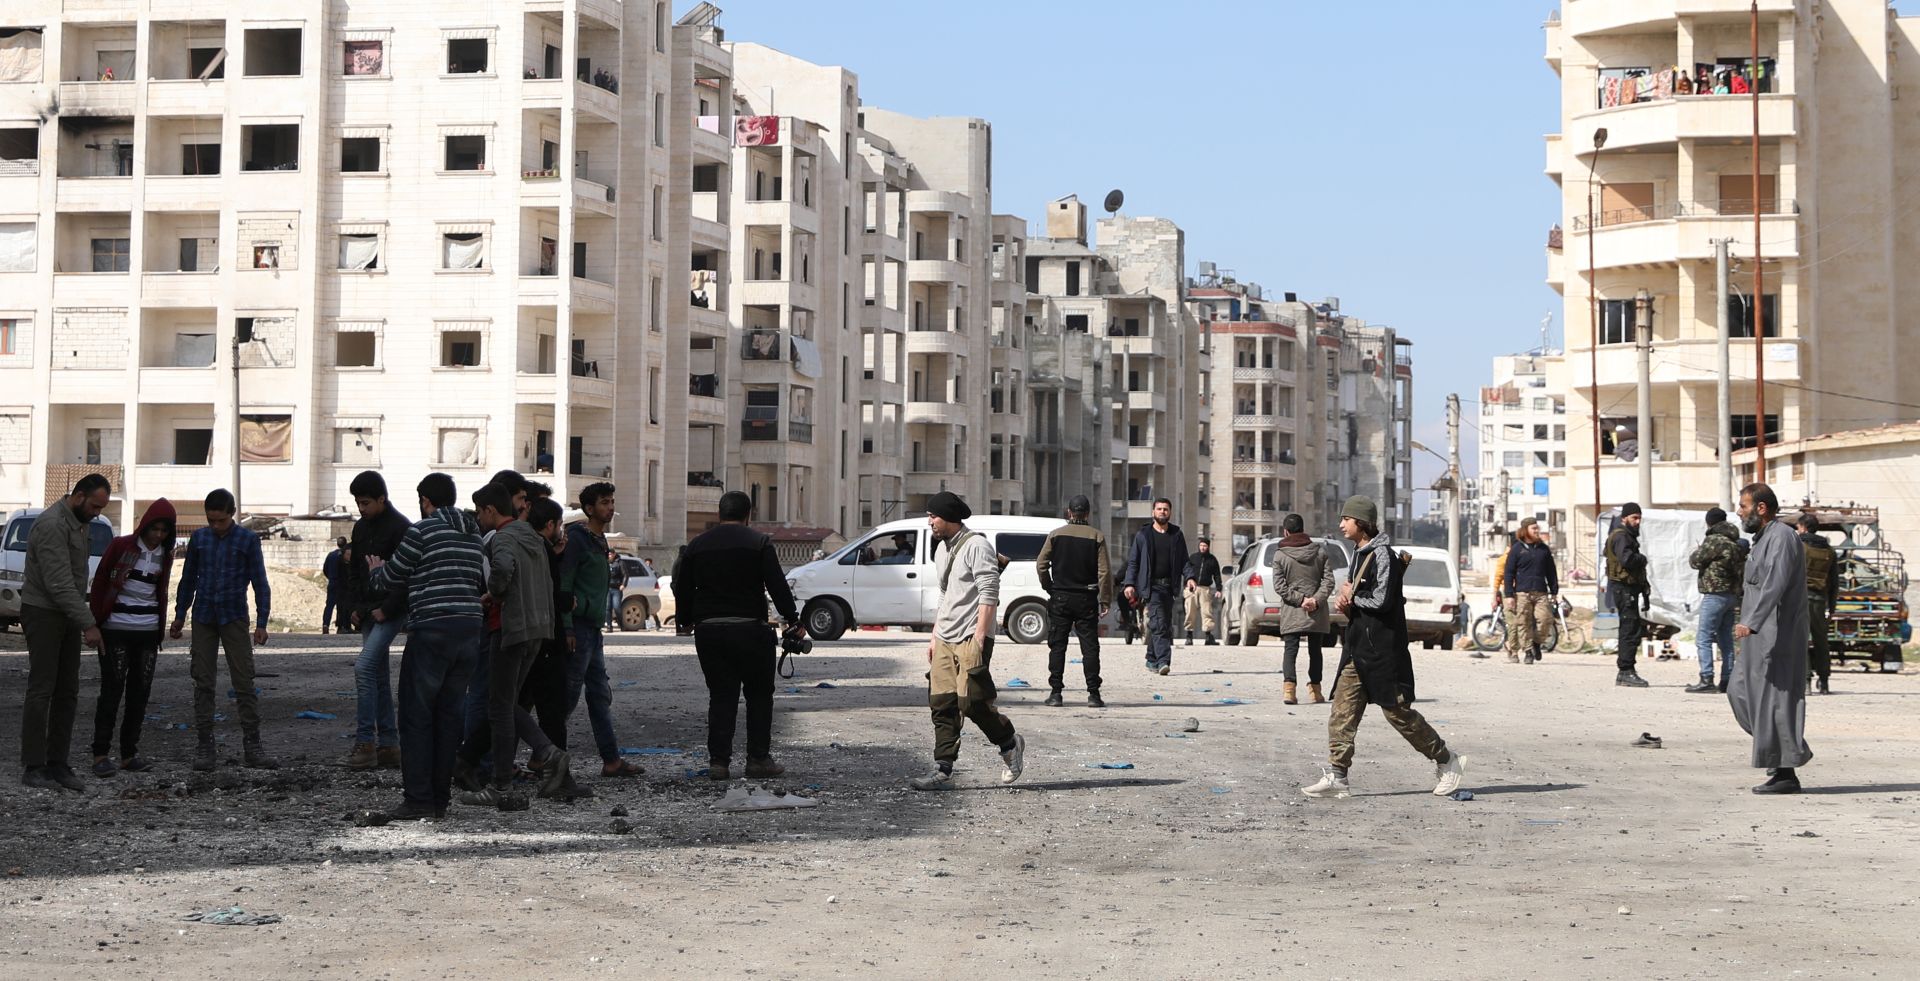 epa08266210 People inspect the site of explosion in Idlib, Syria, 03 March 2020. According to local media sources, at least eight people were killed and 21 were injured in an explosion in Idlib on 03 March, while the exact source of the explosion is not known yet.  EPA/YAHYA NEMAH